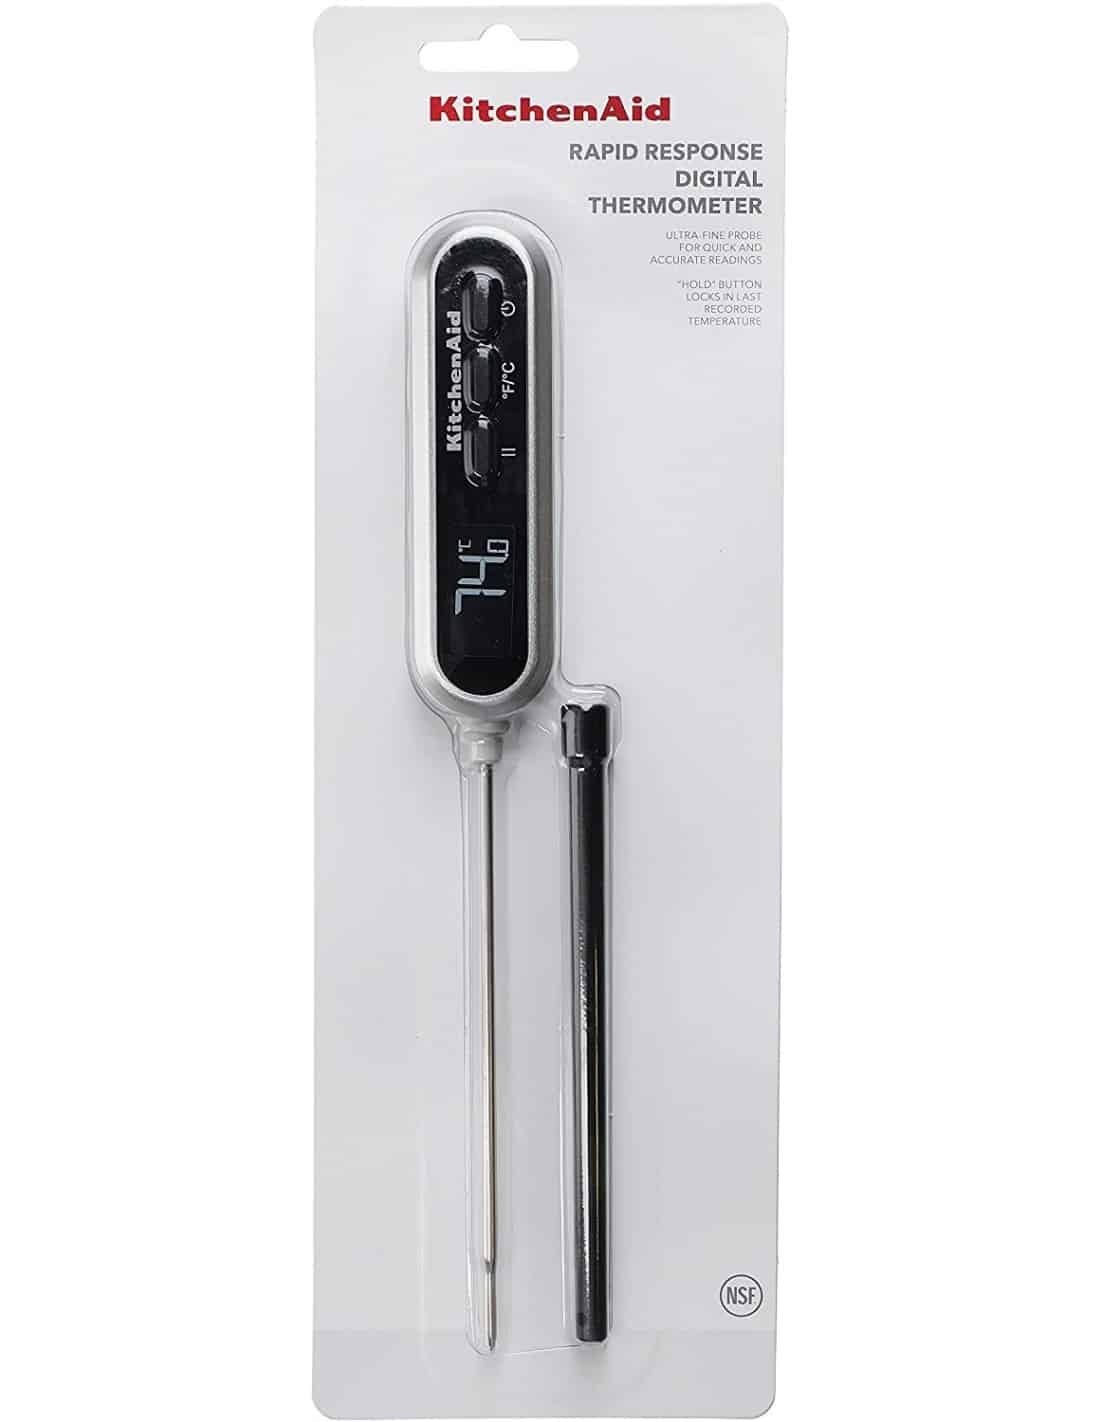 https://www.mimocook.com/31164-thickbox_default/kitchenaid-backlit-digital-instant-thermometer-for-cooking.jpg